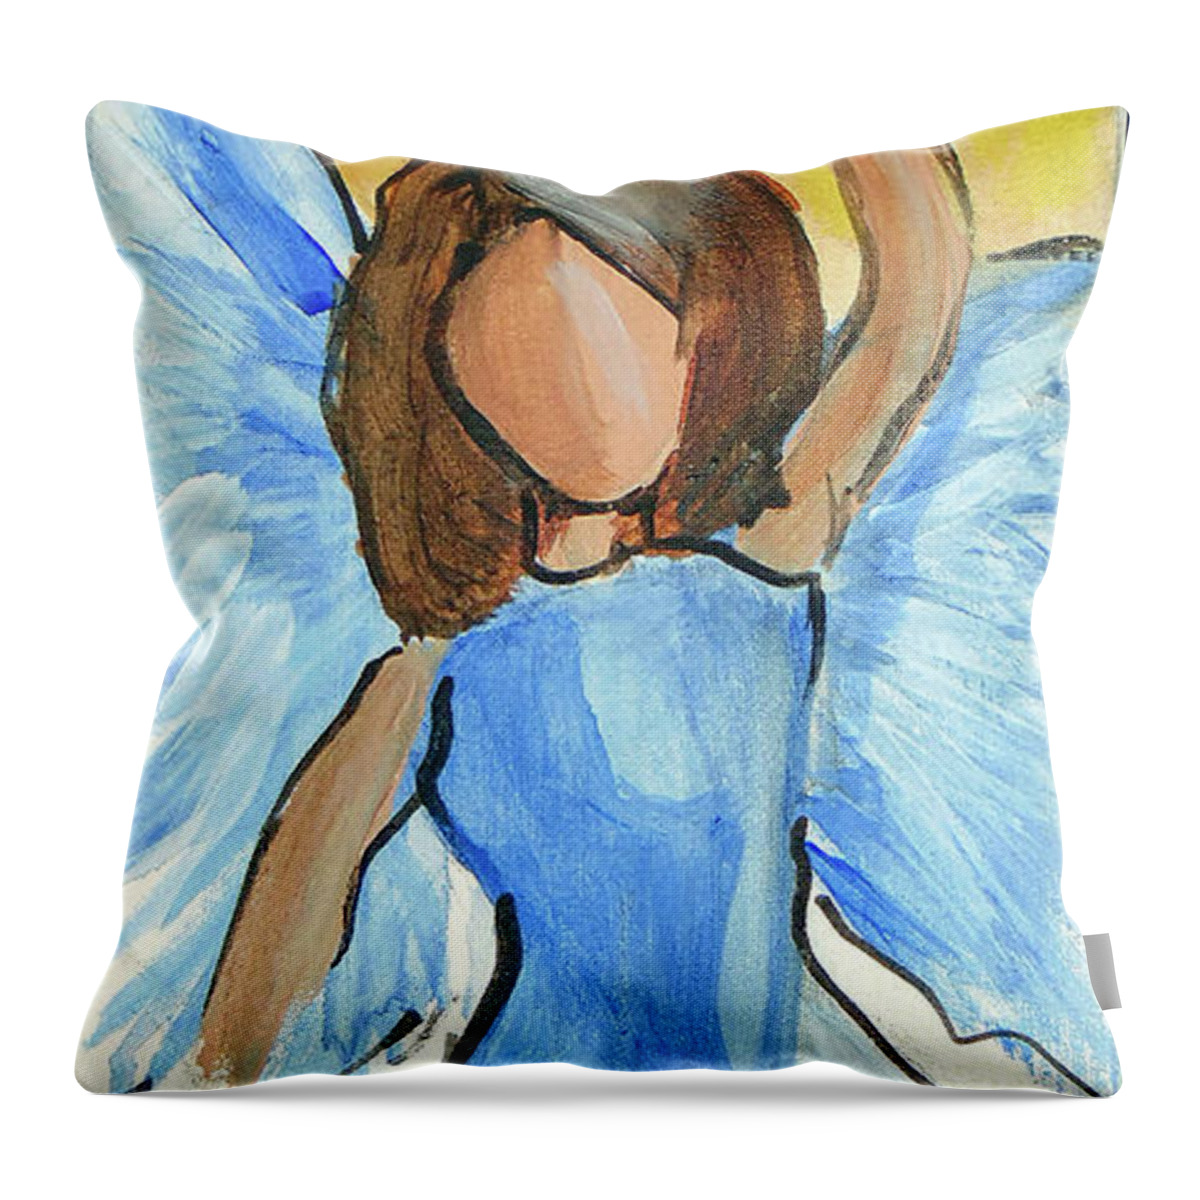  Throw Pillow featuring the painting Praising Angel by Loretta Nash